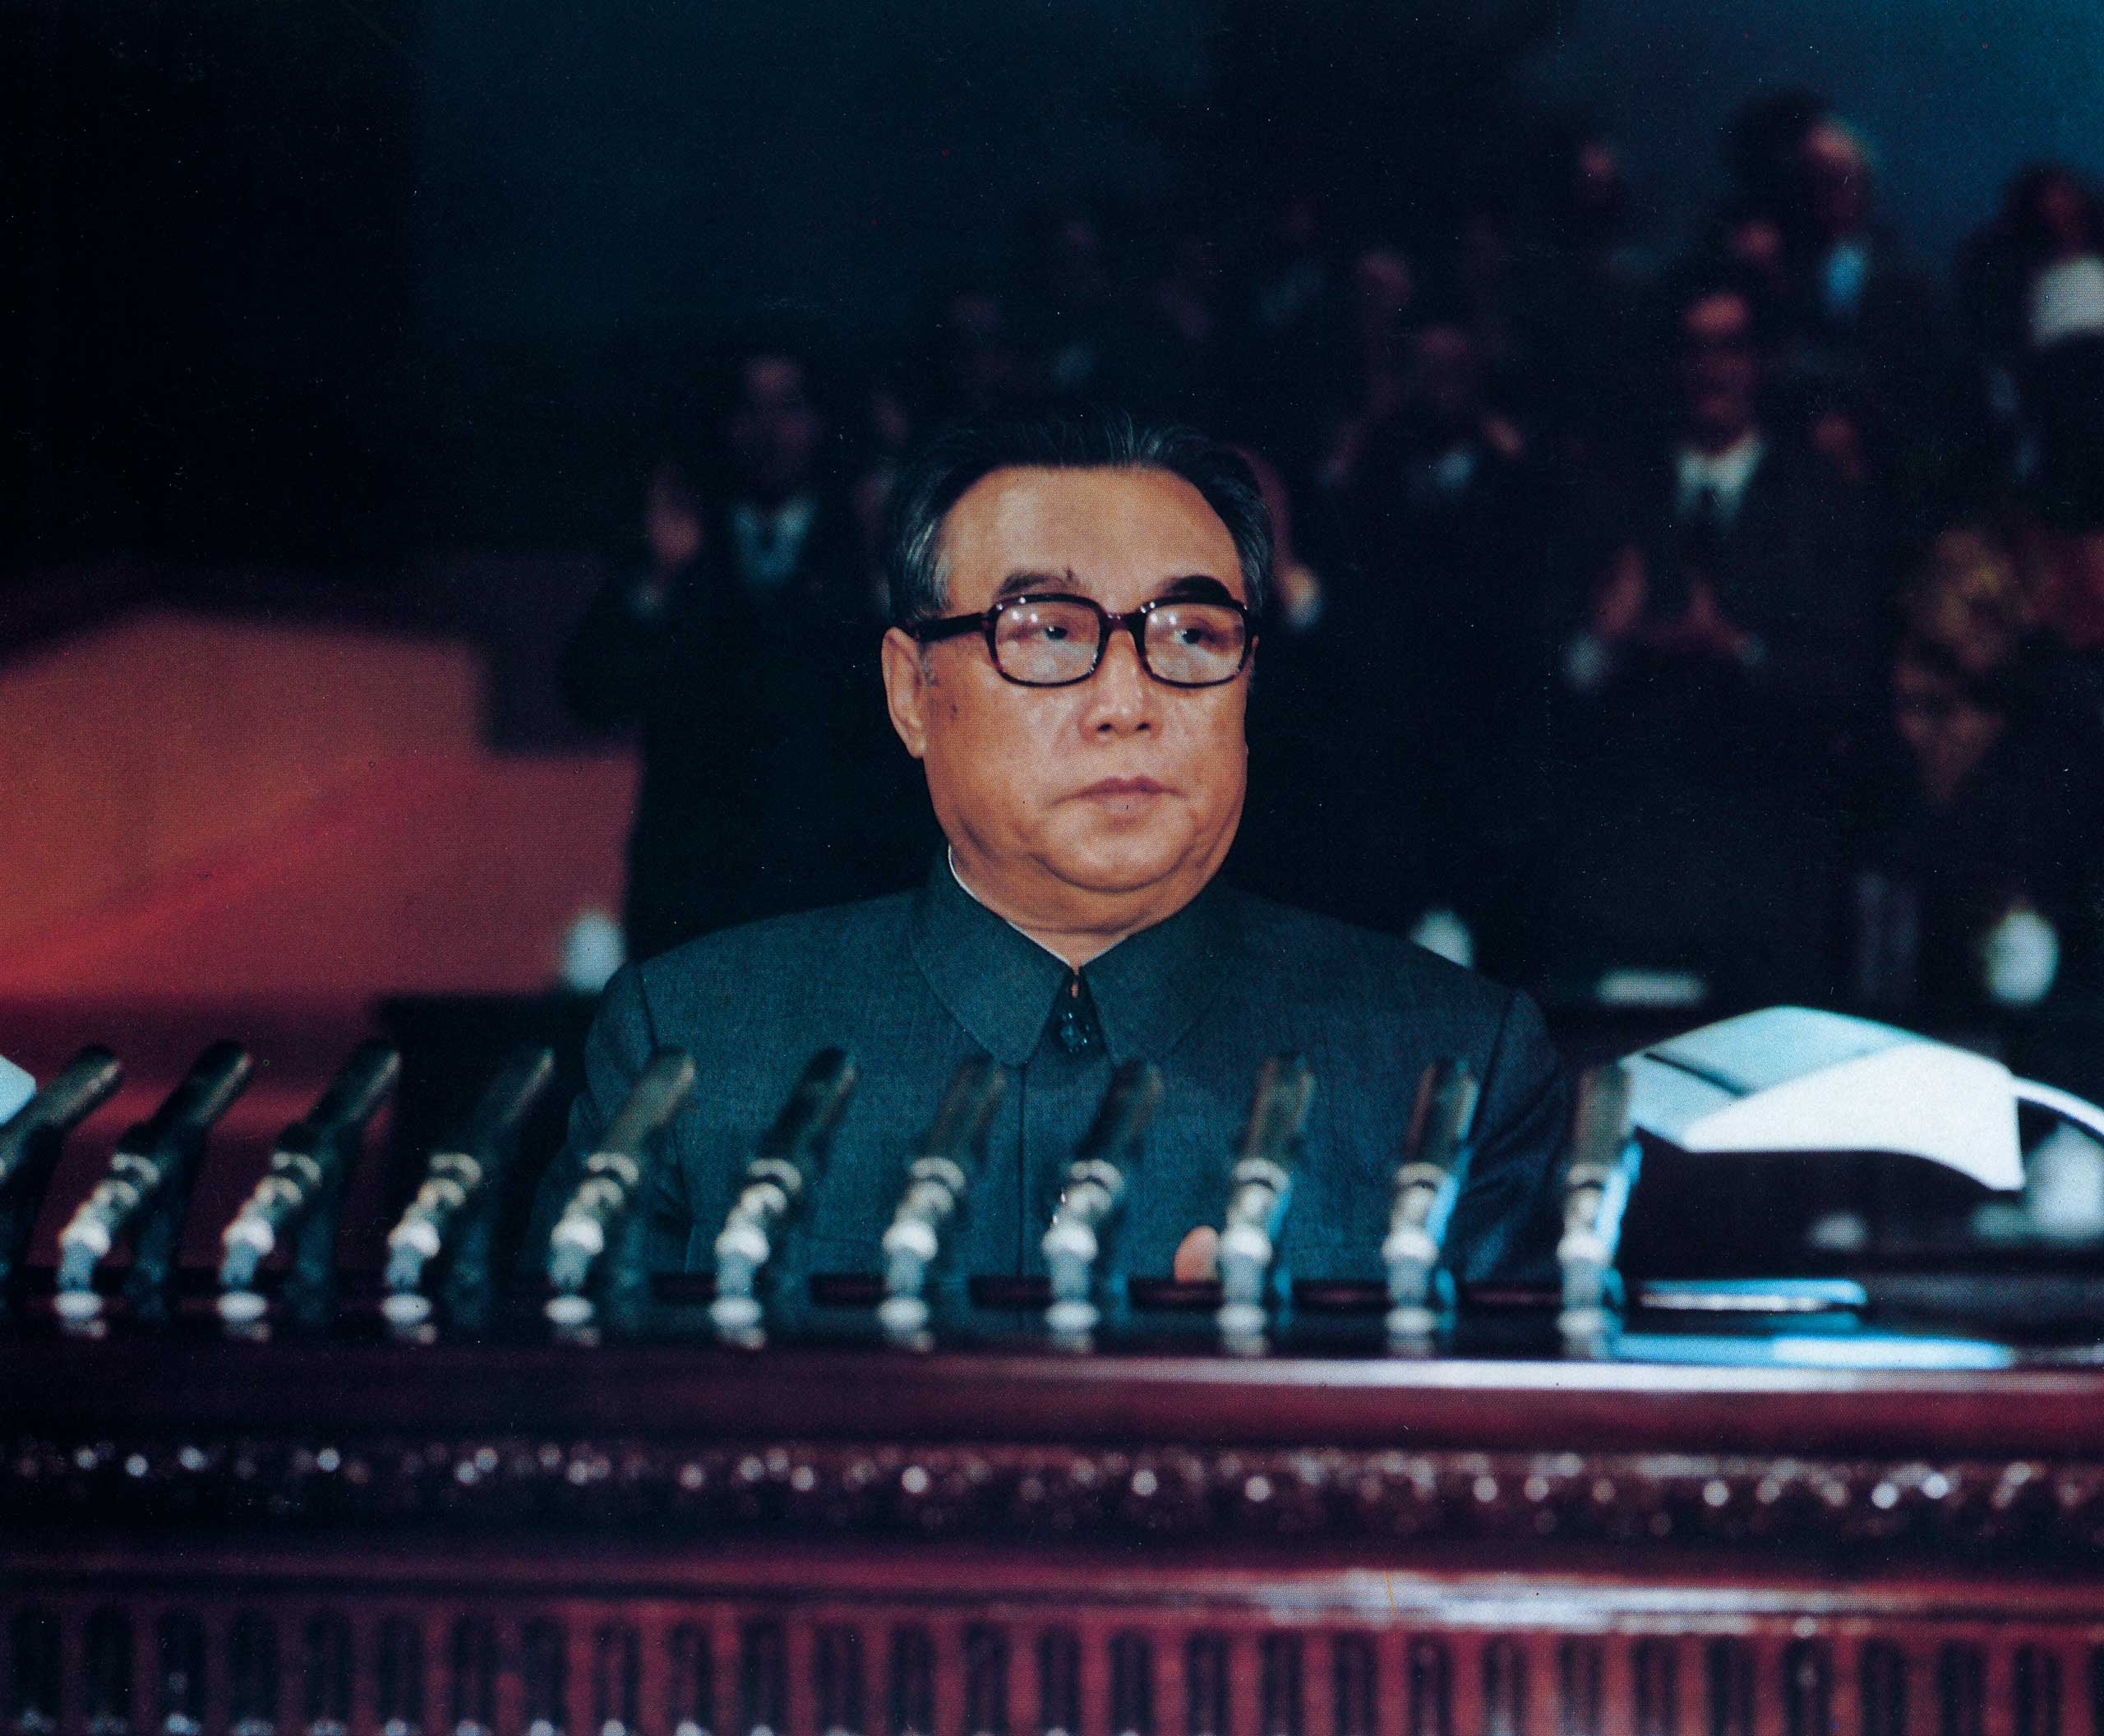 North Korea's founder Kim Il Sung in Pyongyang, Oct. 10, 1980. (AP)